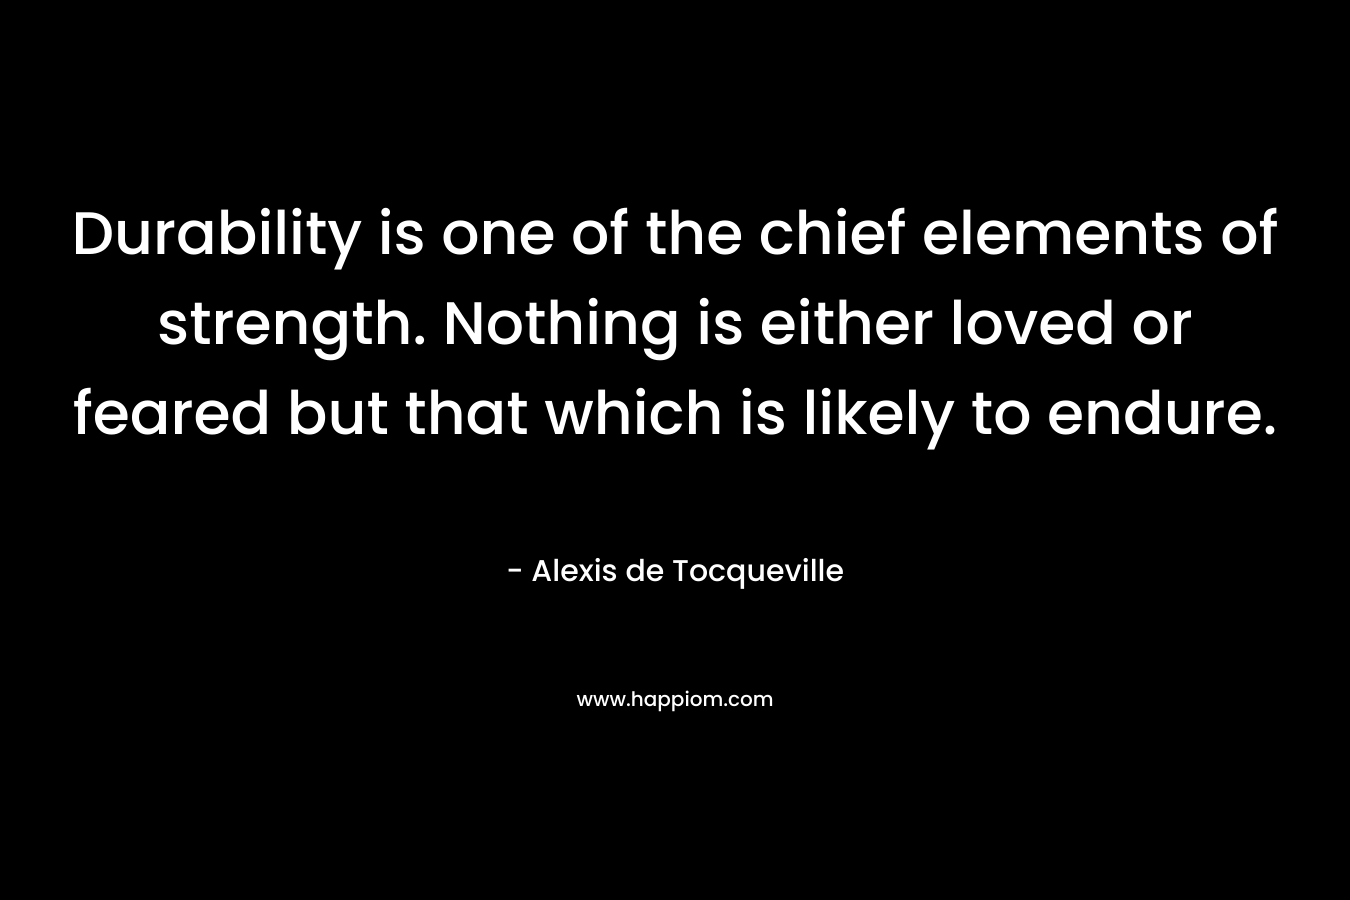 Durability is one of the chief elements of strength. Nothing is either loved or feared but that which is likely to endure. – Alexis de Tocqueville